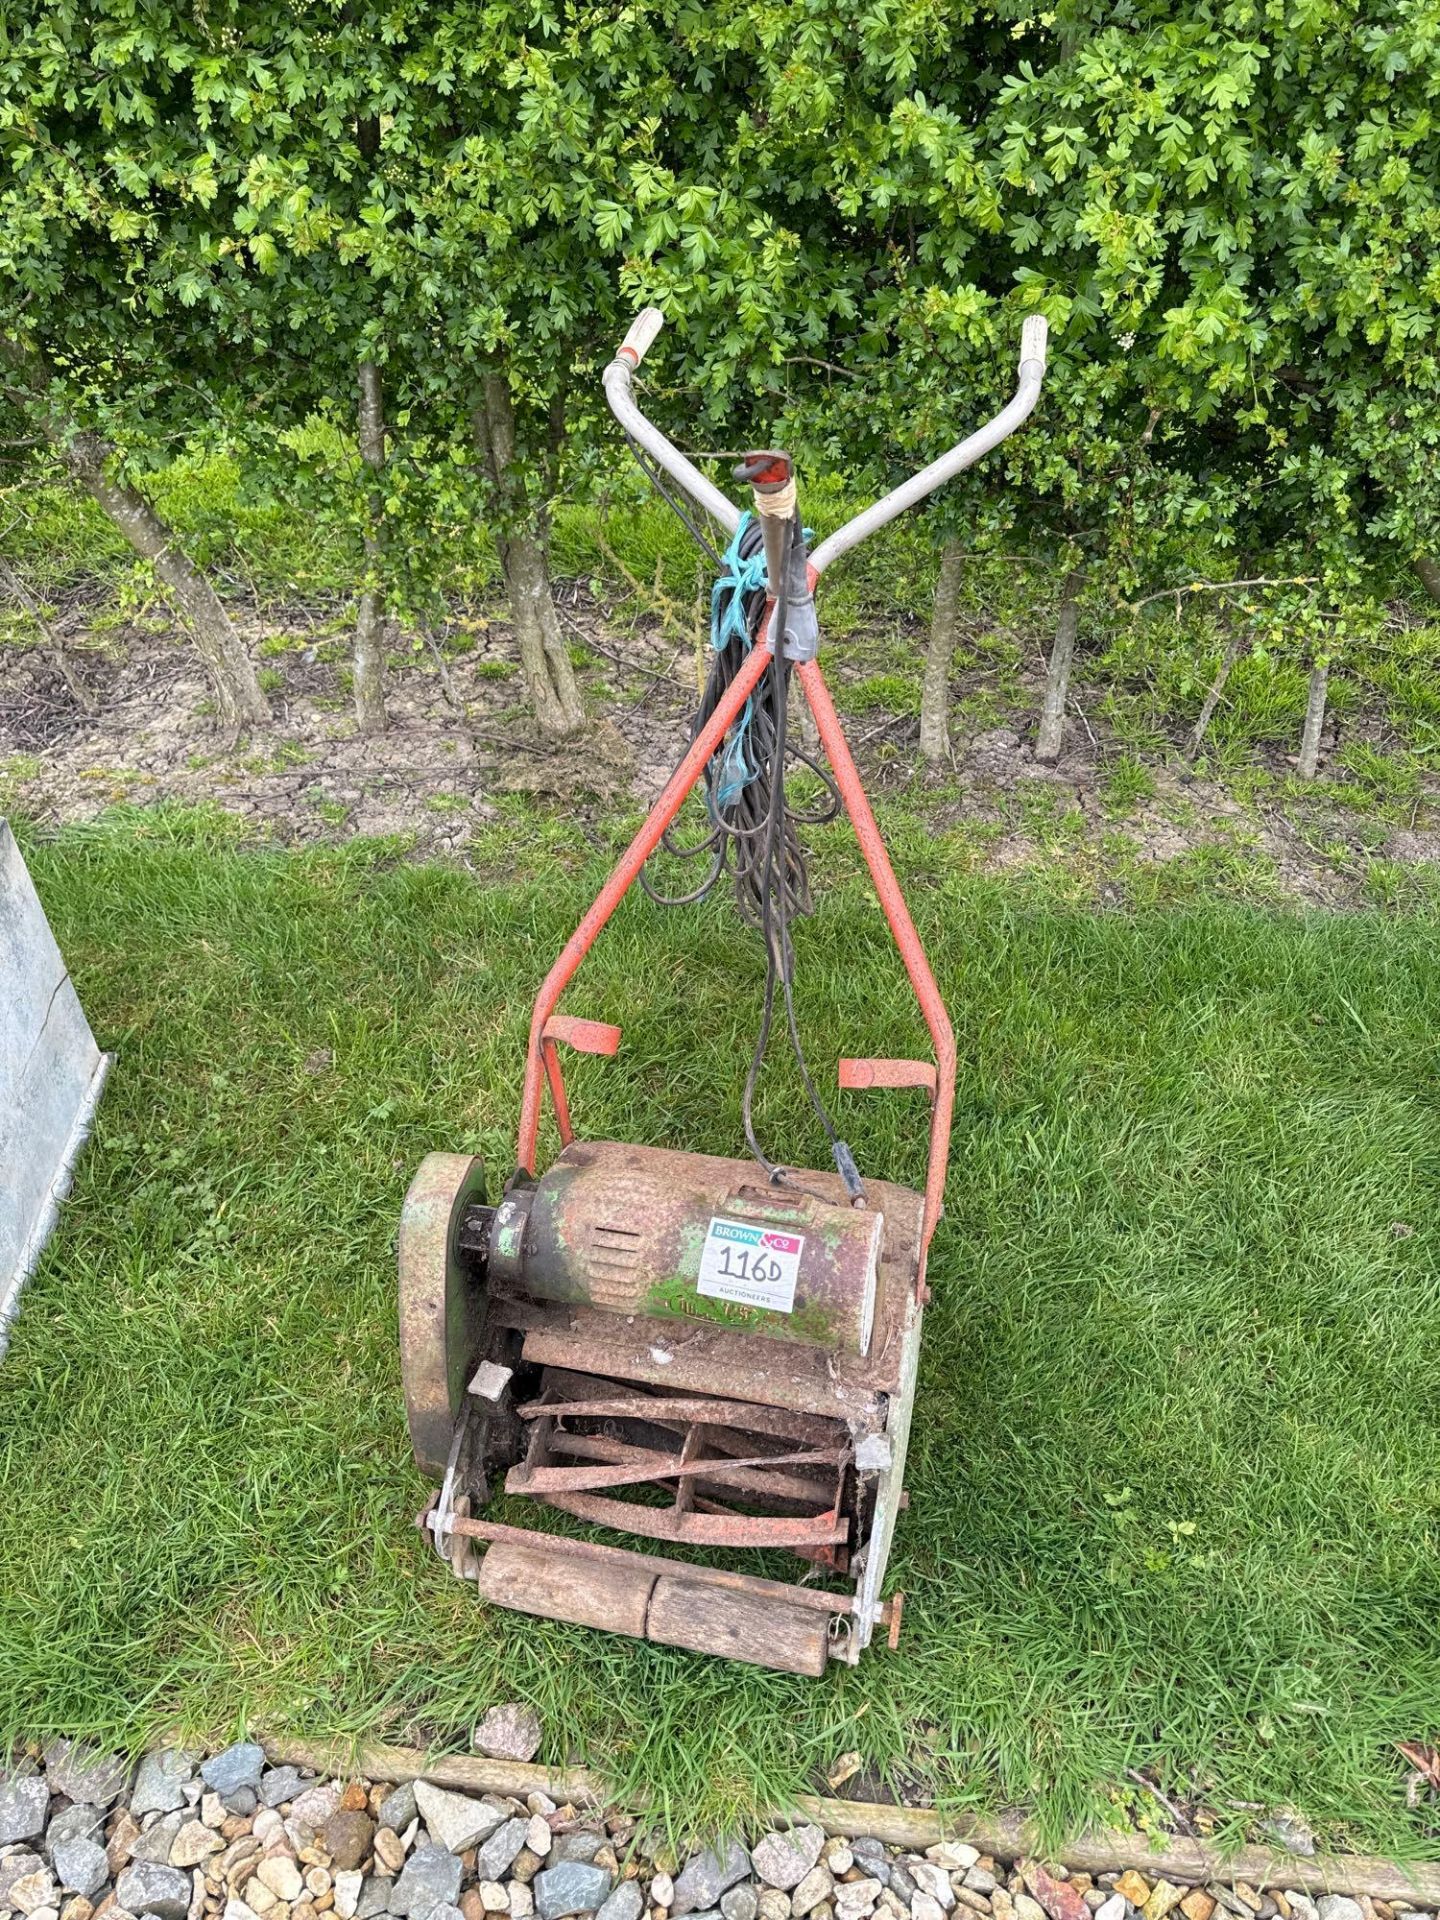 Qualcast electric cylinder mower, single phase